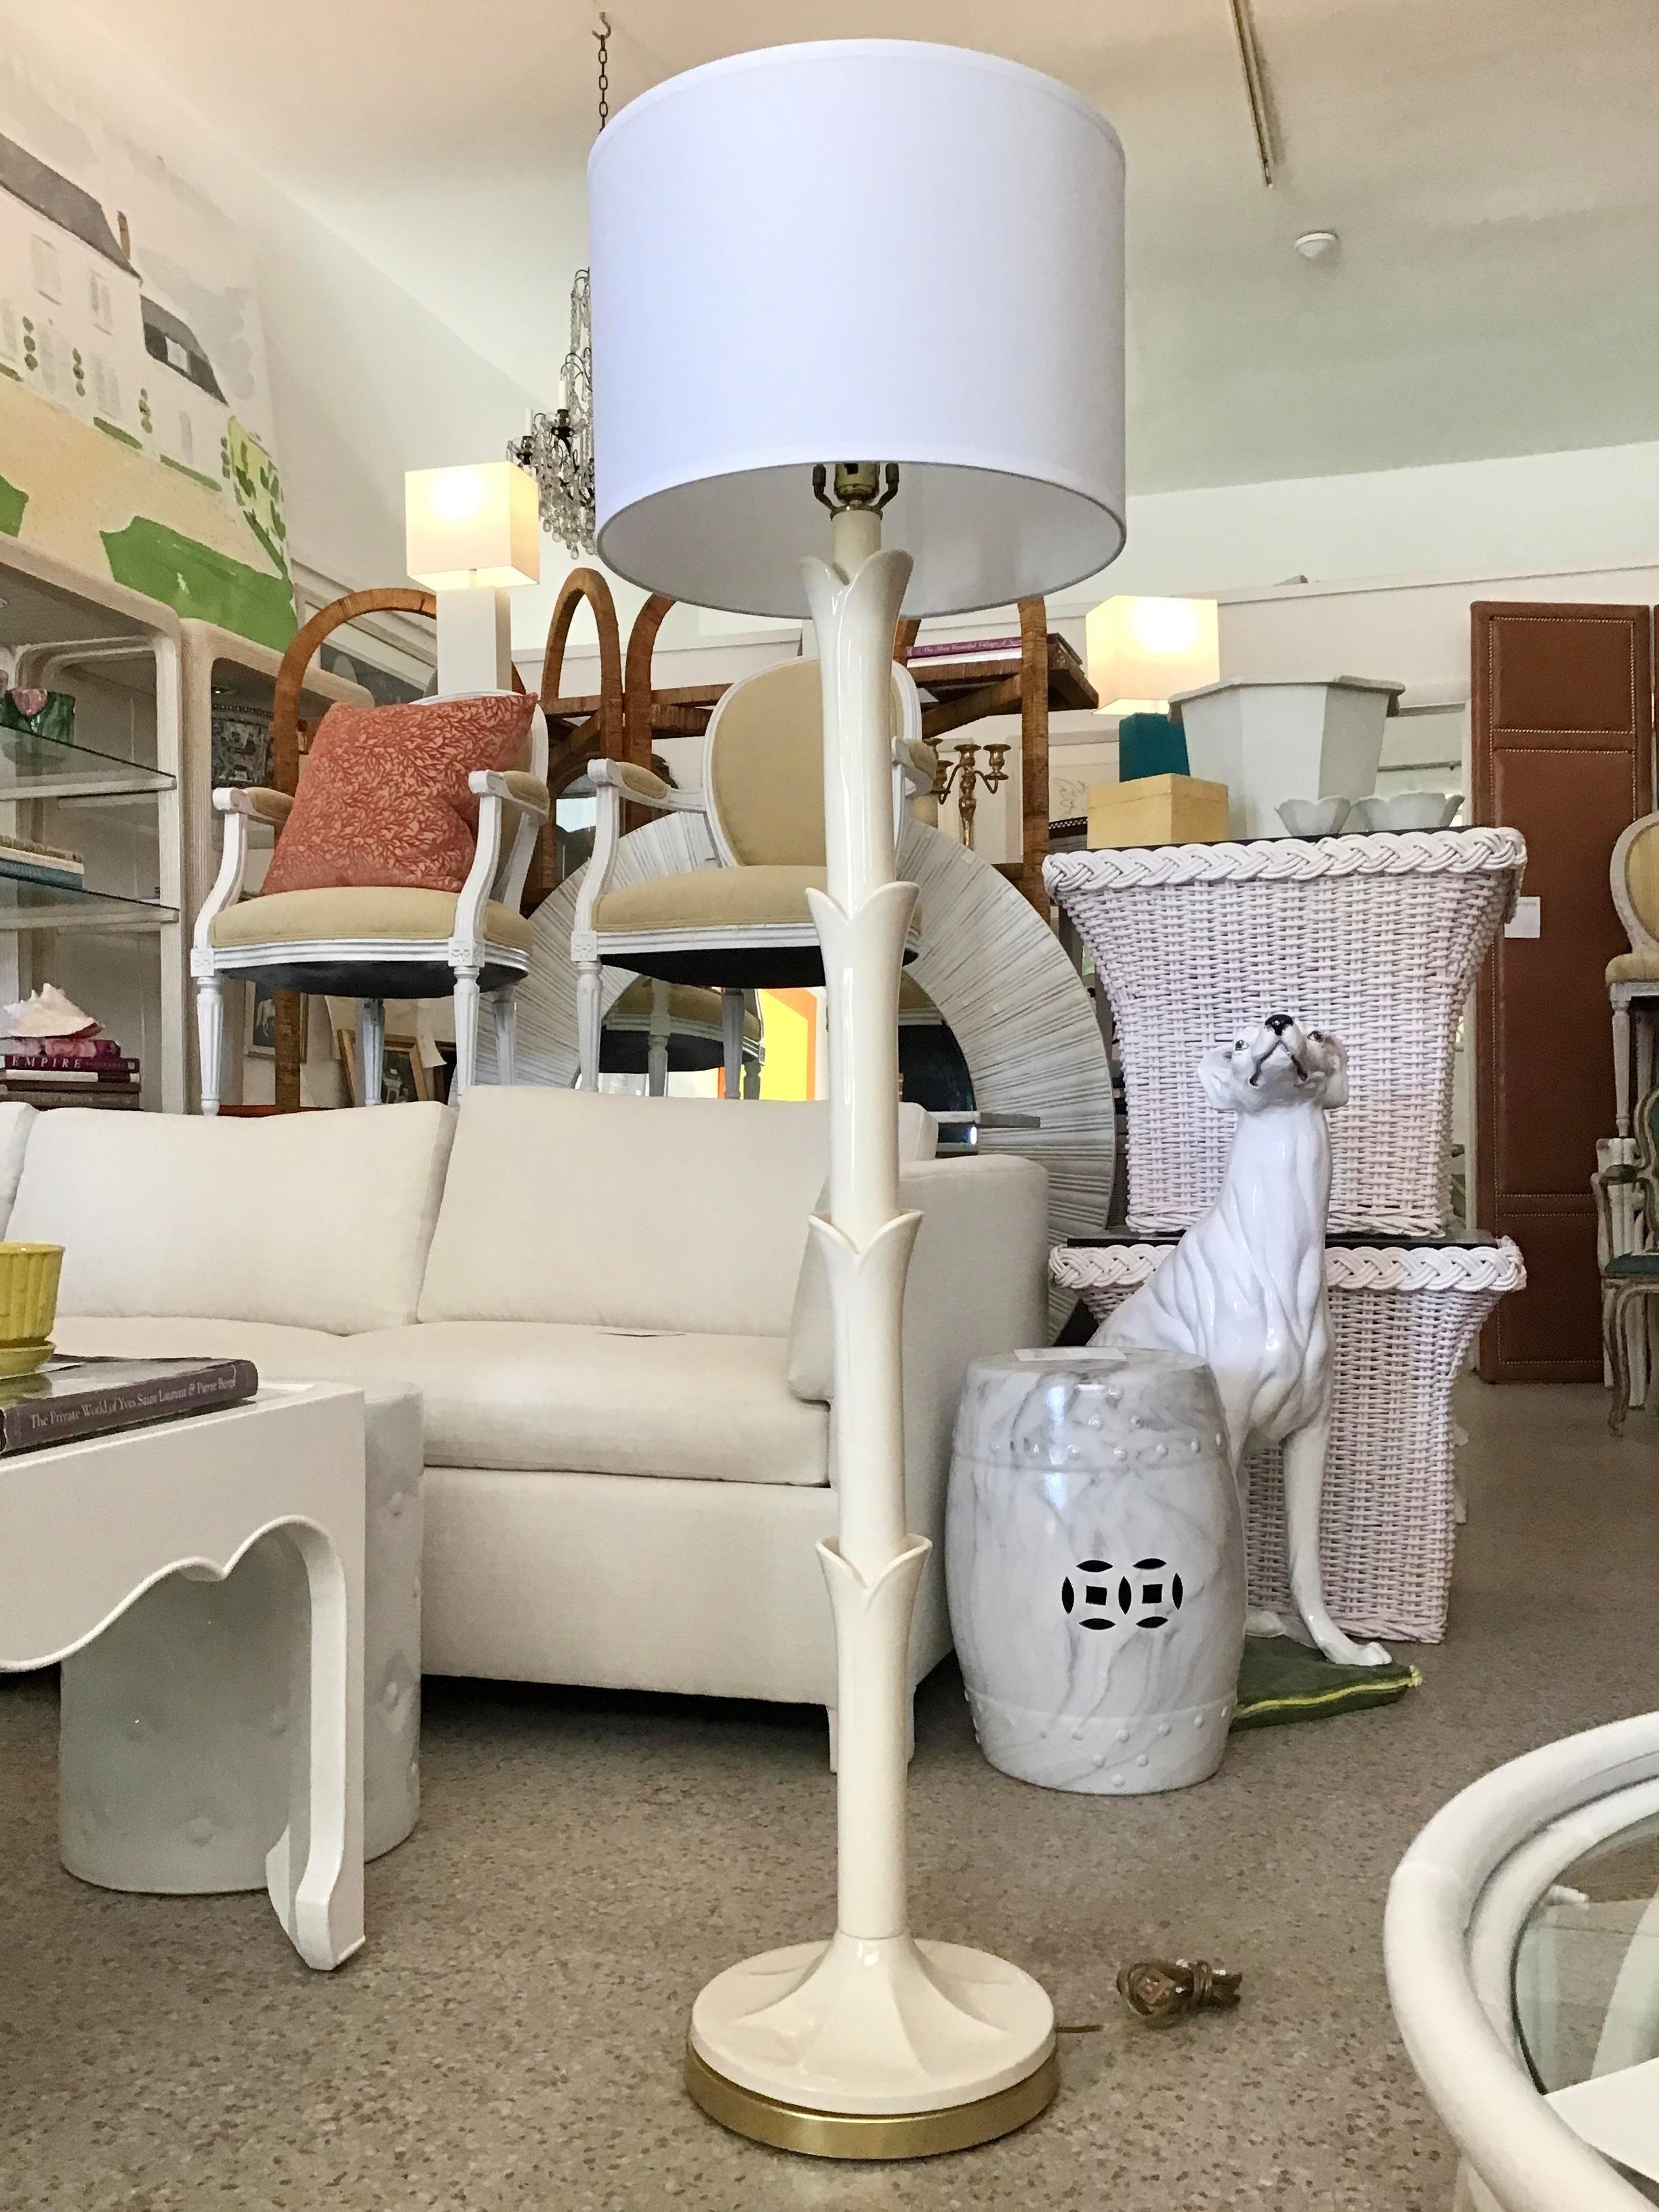 Beautiful glazed ceramic tall floor lamp with new white shade in the Serge Roche Style. Great addition to your interiors.